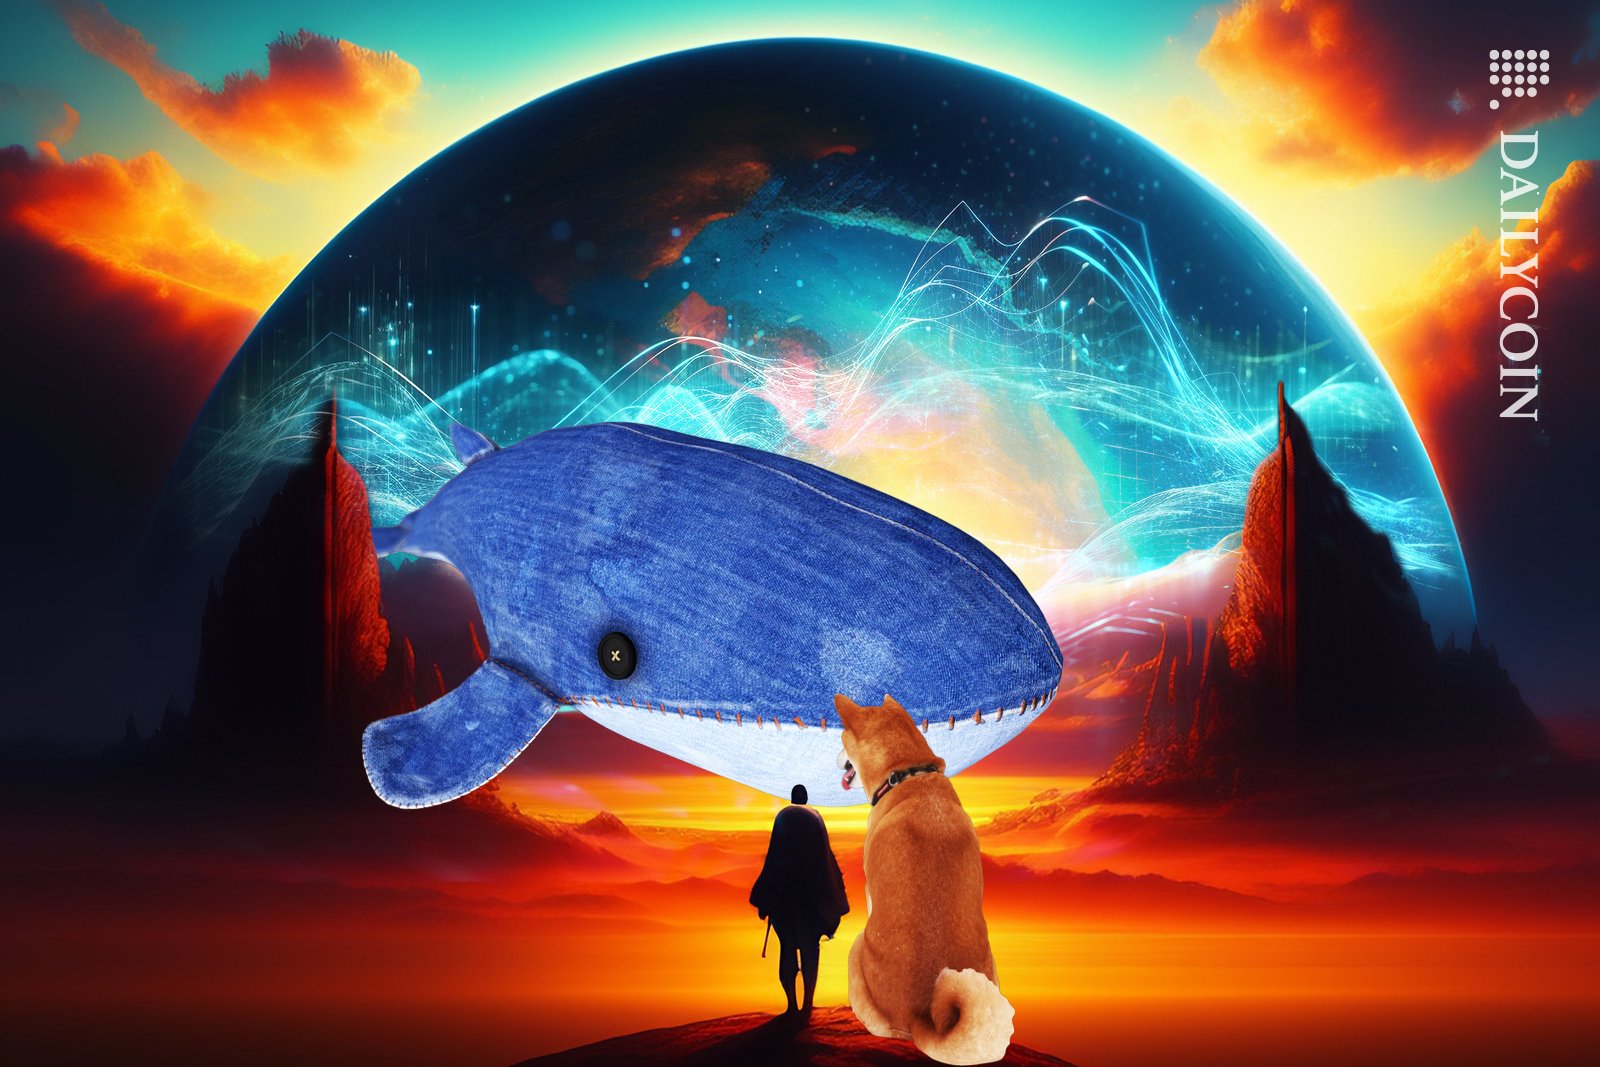 A whale getting in the way of data shown, shiba and a man are trying to look into the data bubble.